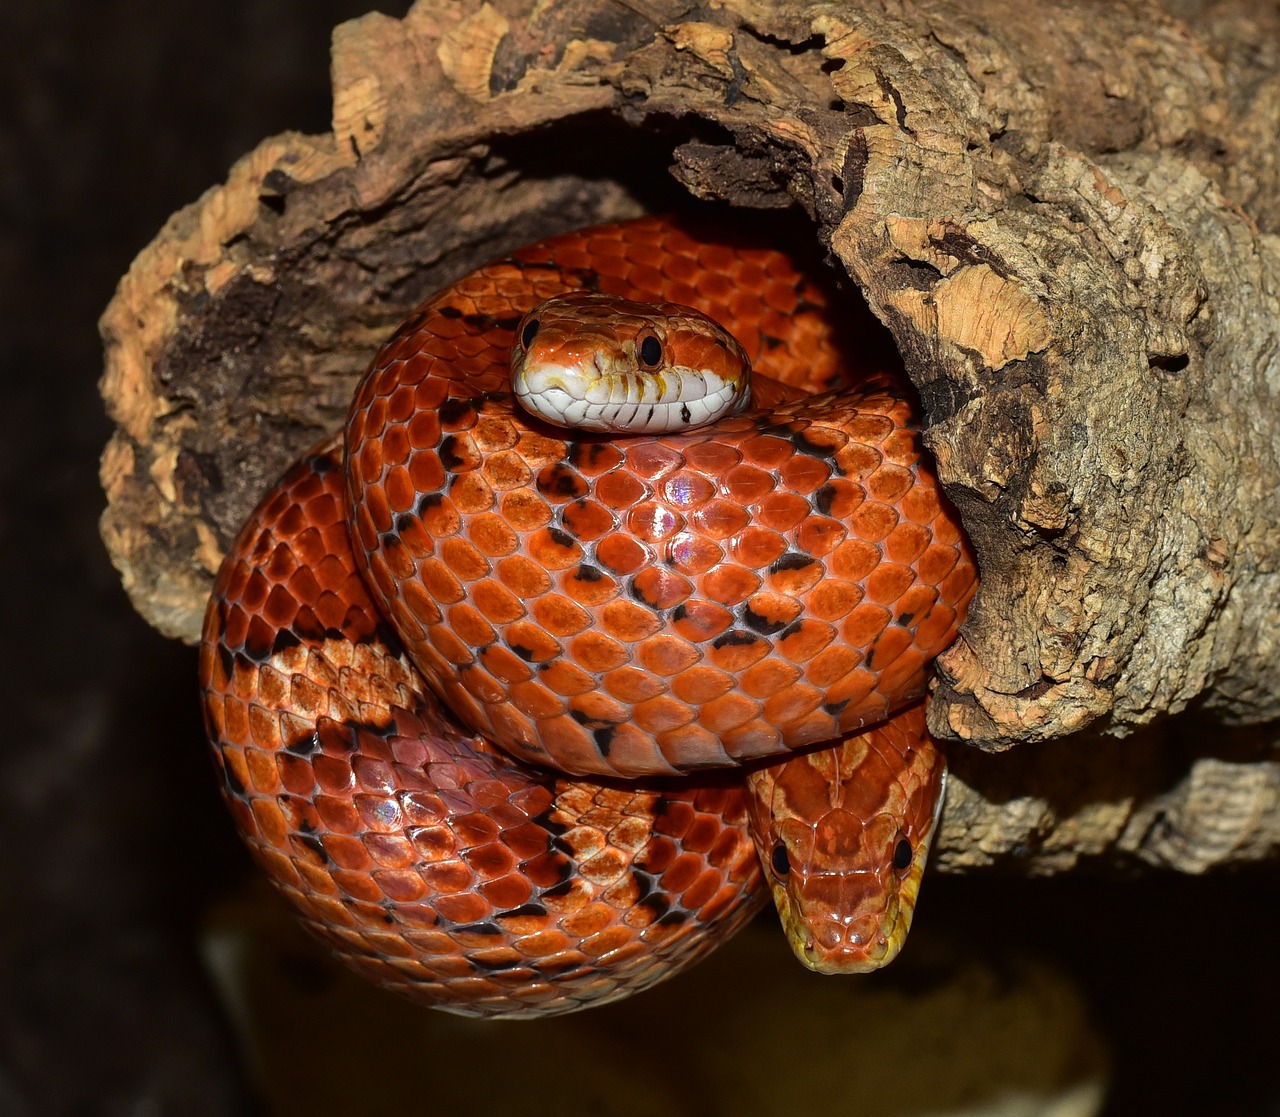 Getting Up Close and Personal with Snakes for Stunning Pictures